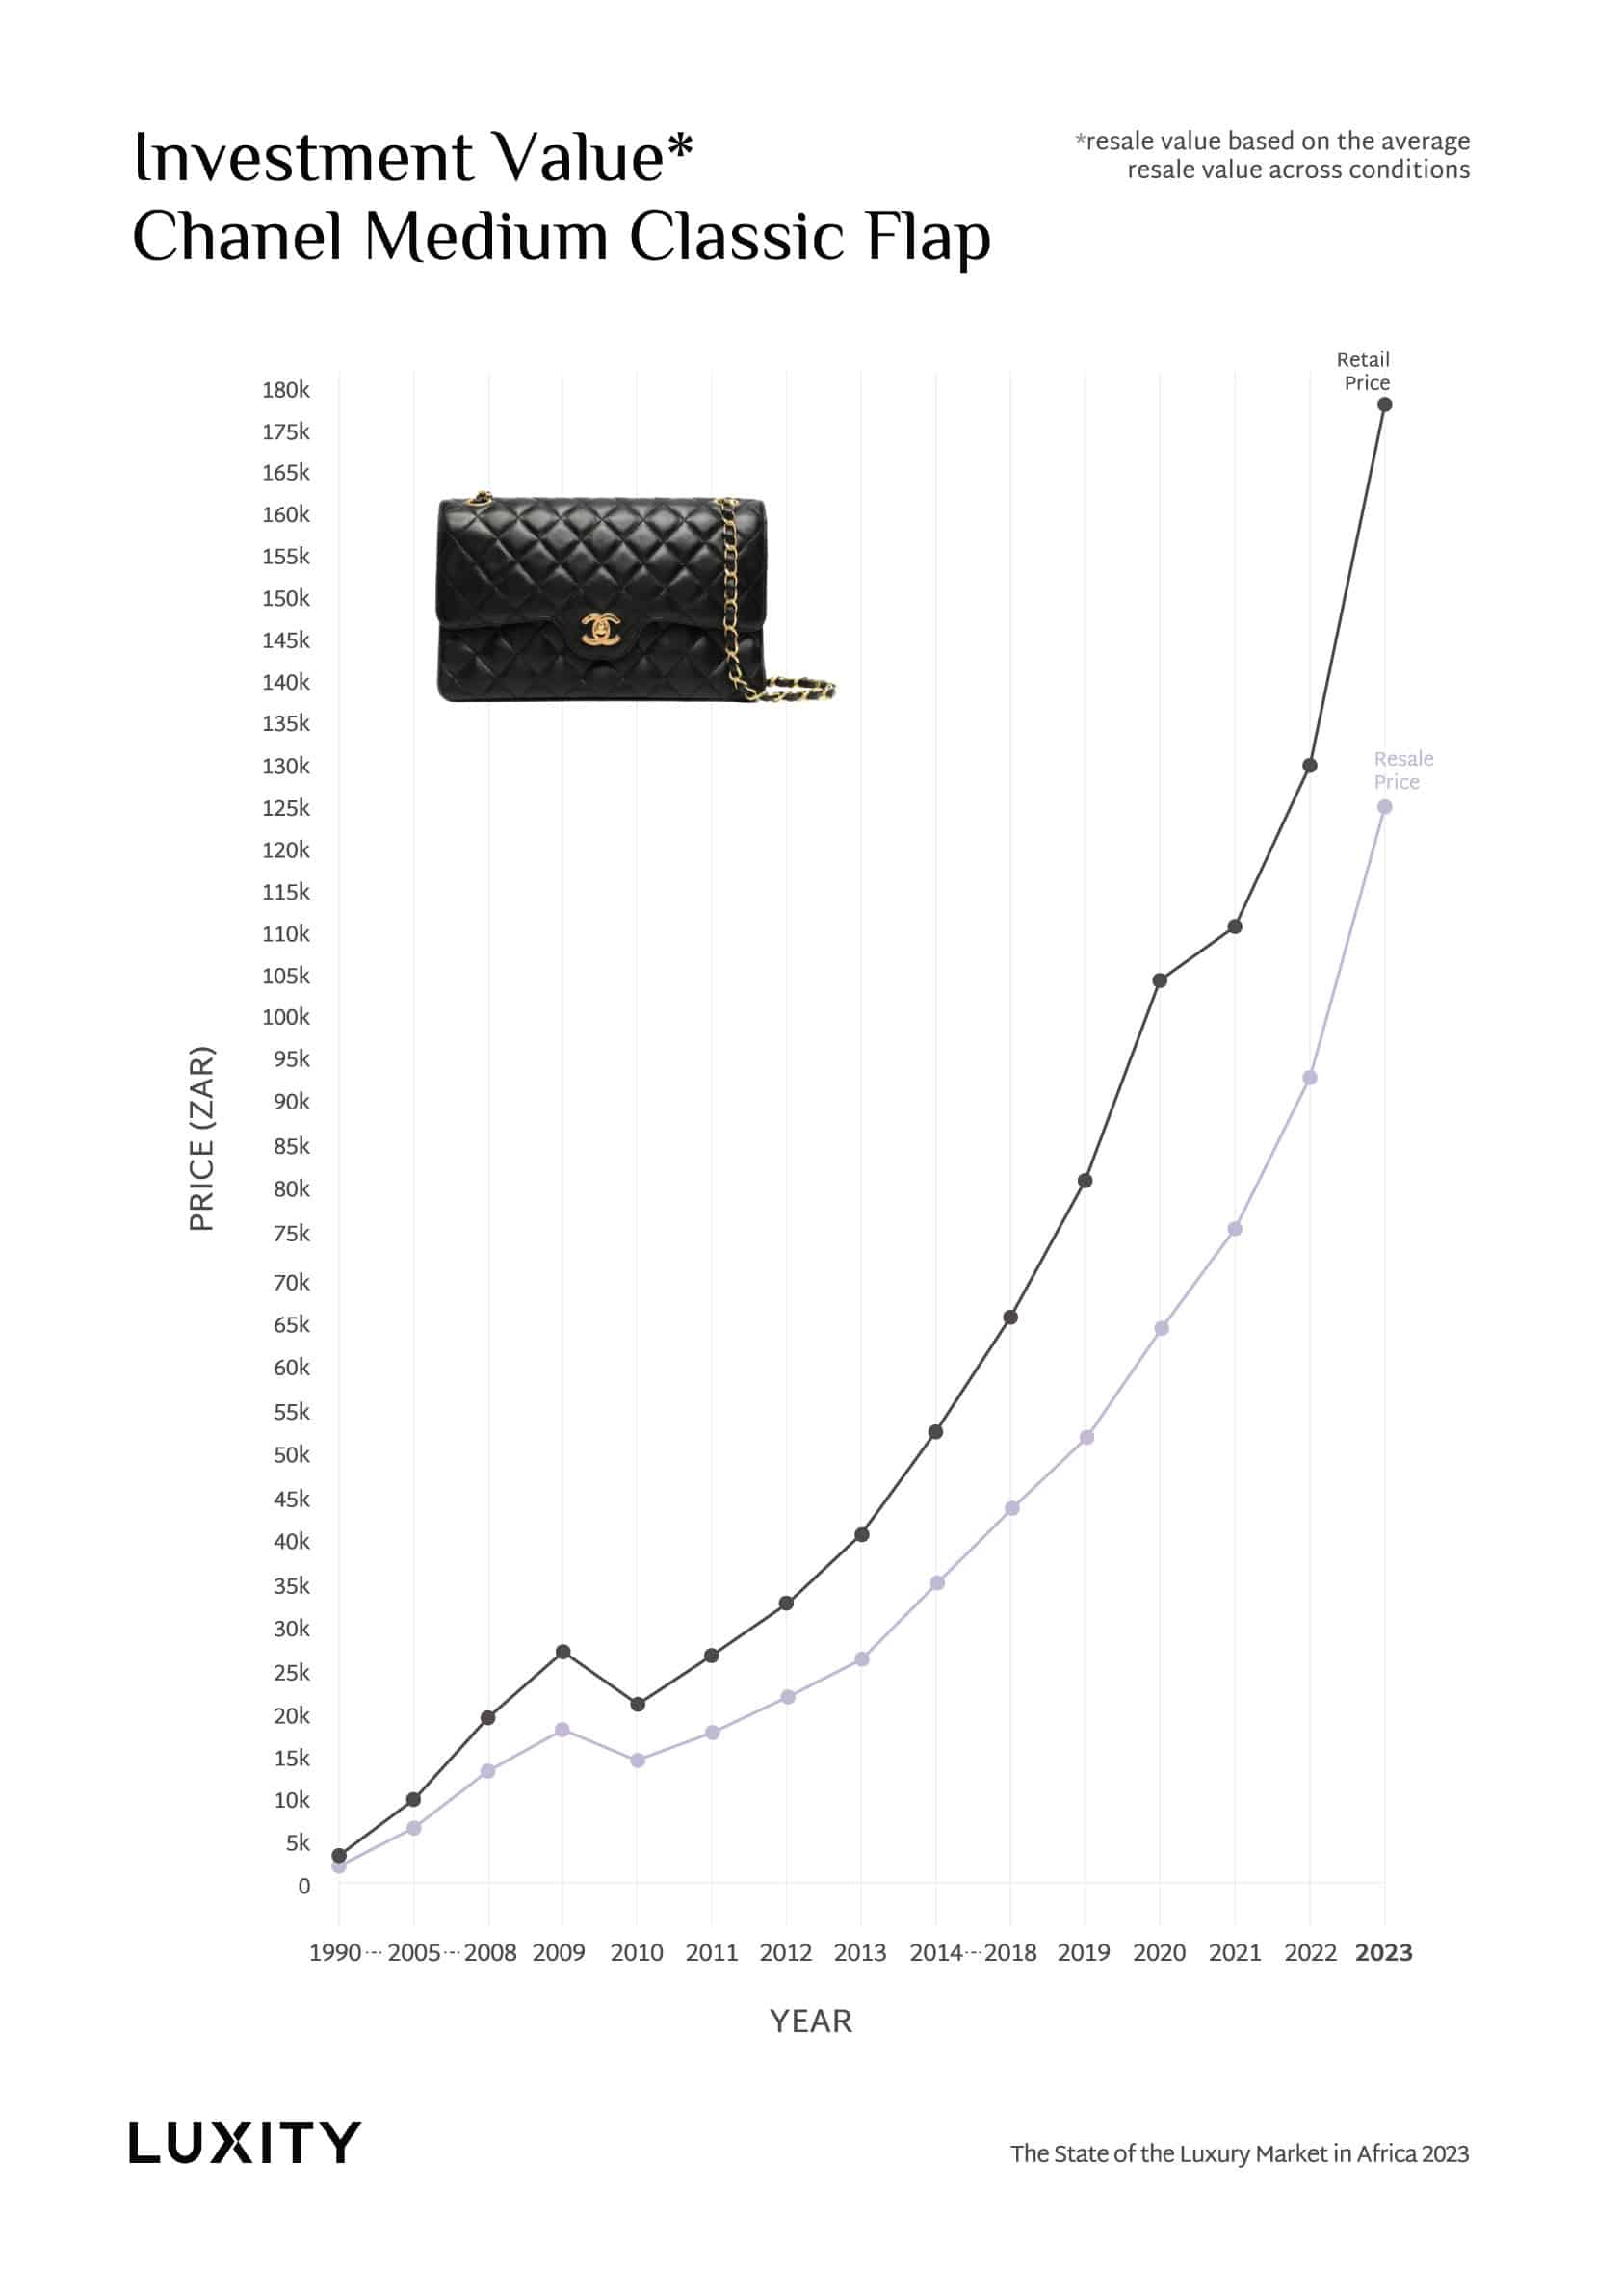 Investment return of a Chanel in Zar